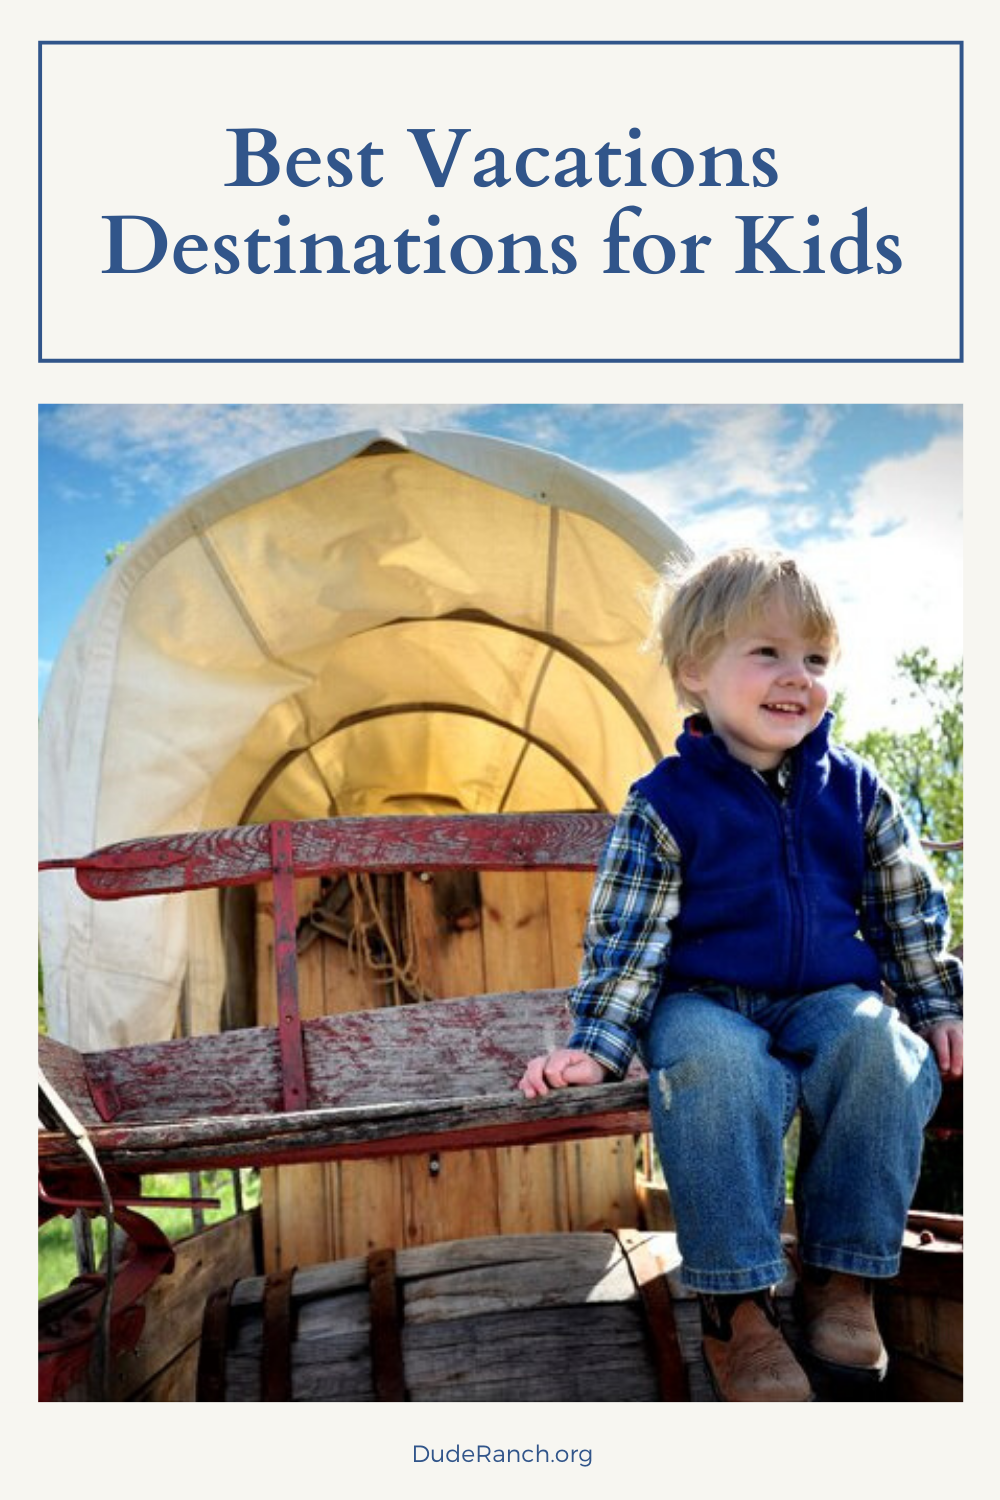 Best Vacations Destinations for Kids